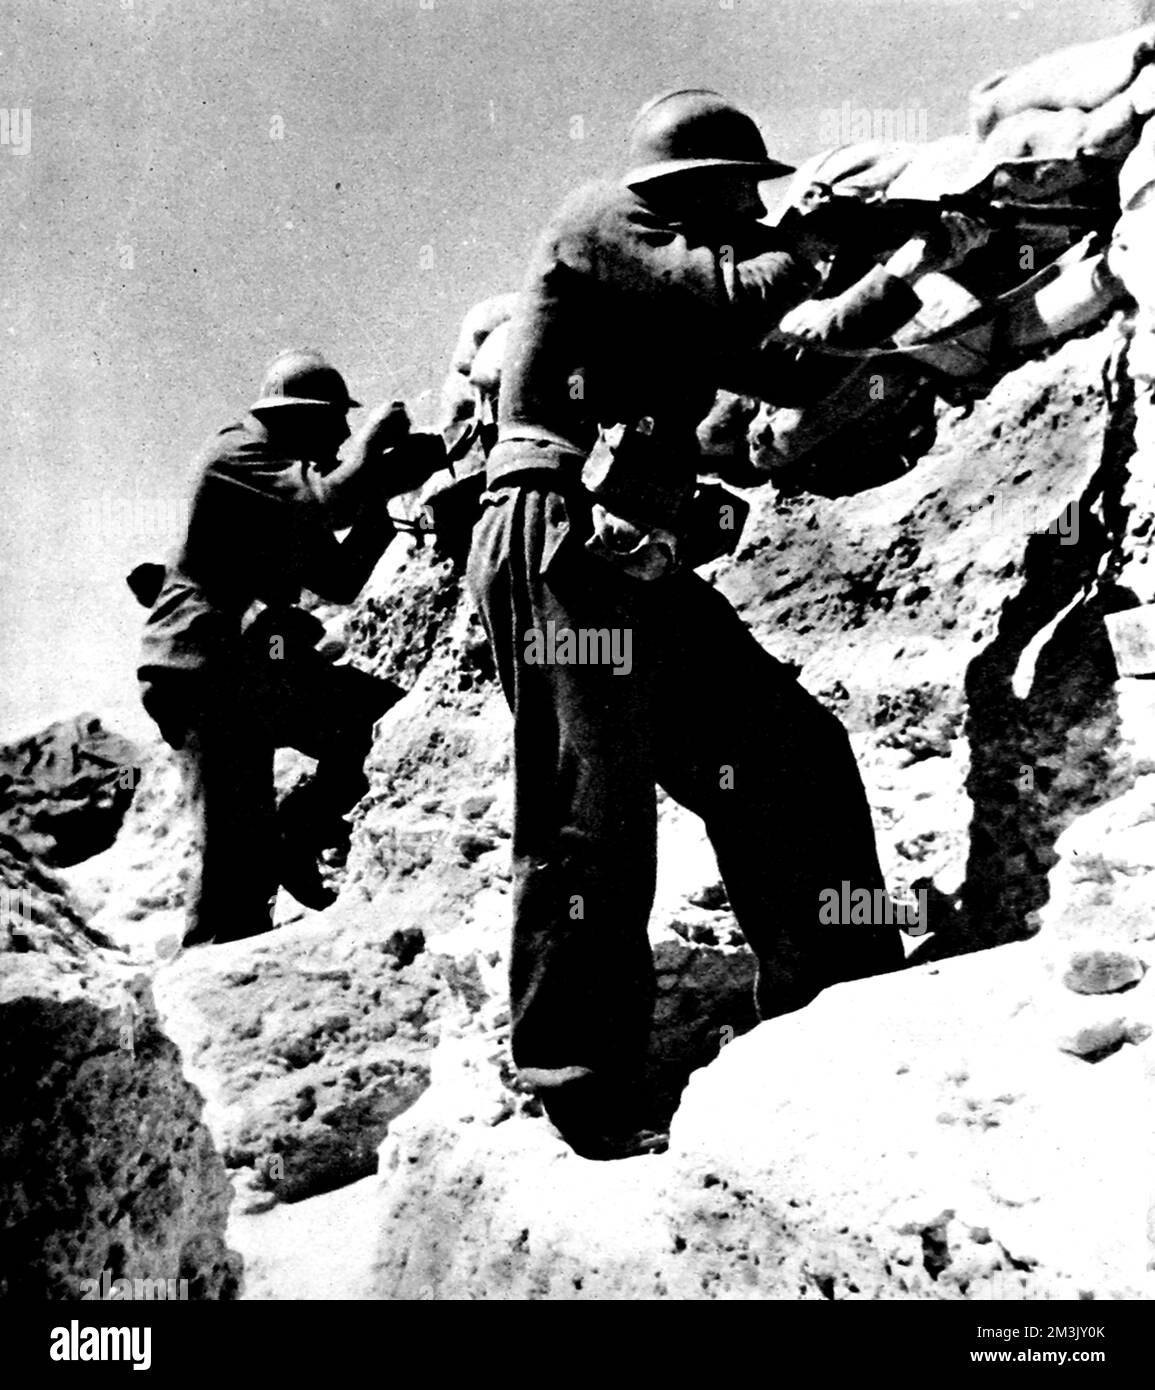 Photograph showing two soldiers of the Abraham Lincoln Battalion firing at Nationalist positions on the Morata Front, during the Spanish Civil War, 1937.  The men are pictured firing their rifles from a well sand-bagged trench.     The Abraham Lincoln Battalion was part of the International Brigade, a volunteer force which supported the Republican Government during the Spanish Civil War.  Volunteers came from all over Europe and North America; the Abraham Lincoln Battalion had men from Cuba, Mexico, the Philippines, Canada and the USA.     Date: 1937 Stock Photo